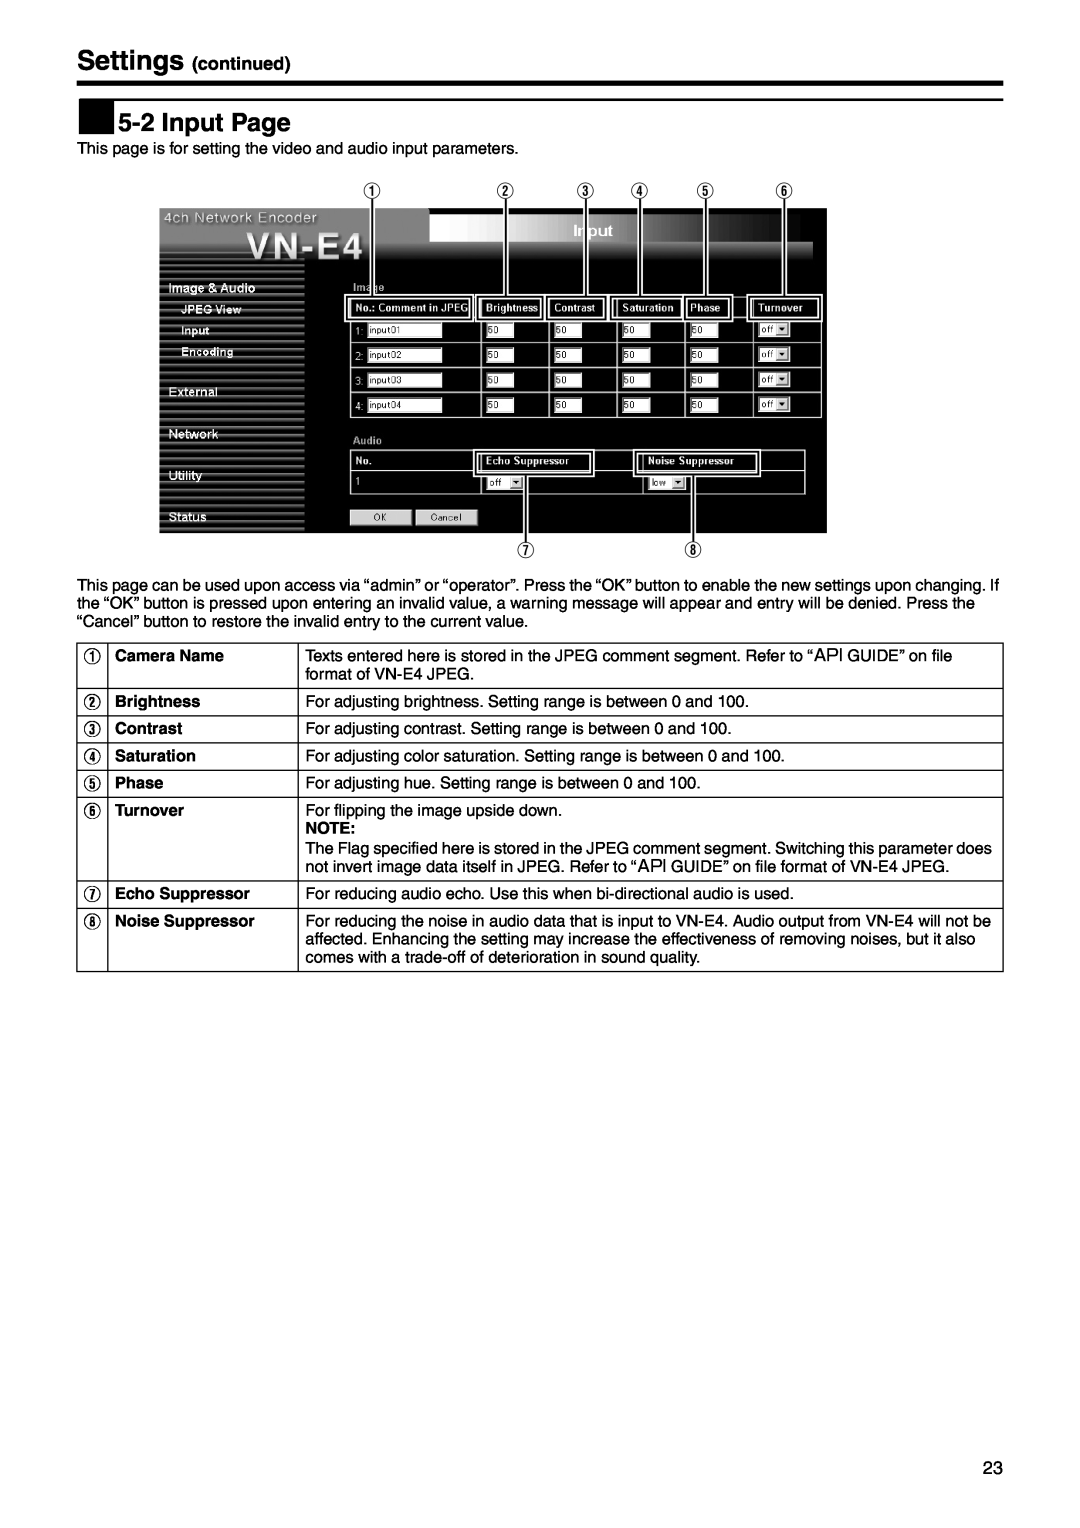 JVC VN-E4 manual  5-2 Input Page, Camera Name, Brightness, Contrast, Saturation, Phase, Turnover, Echo Suppressor 